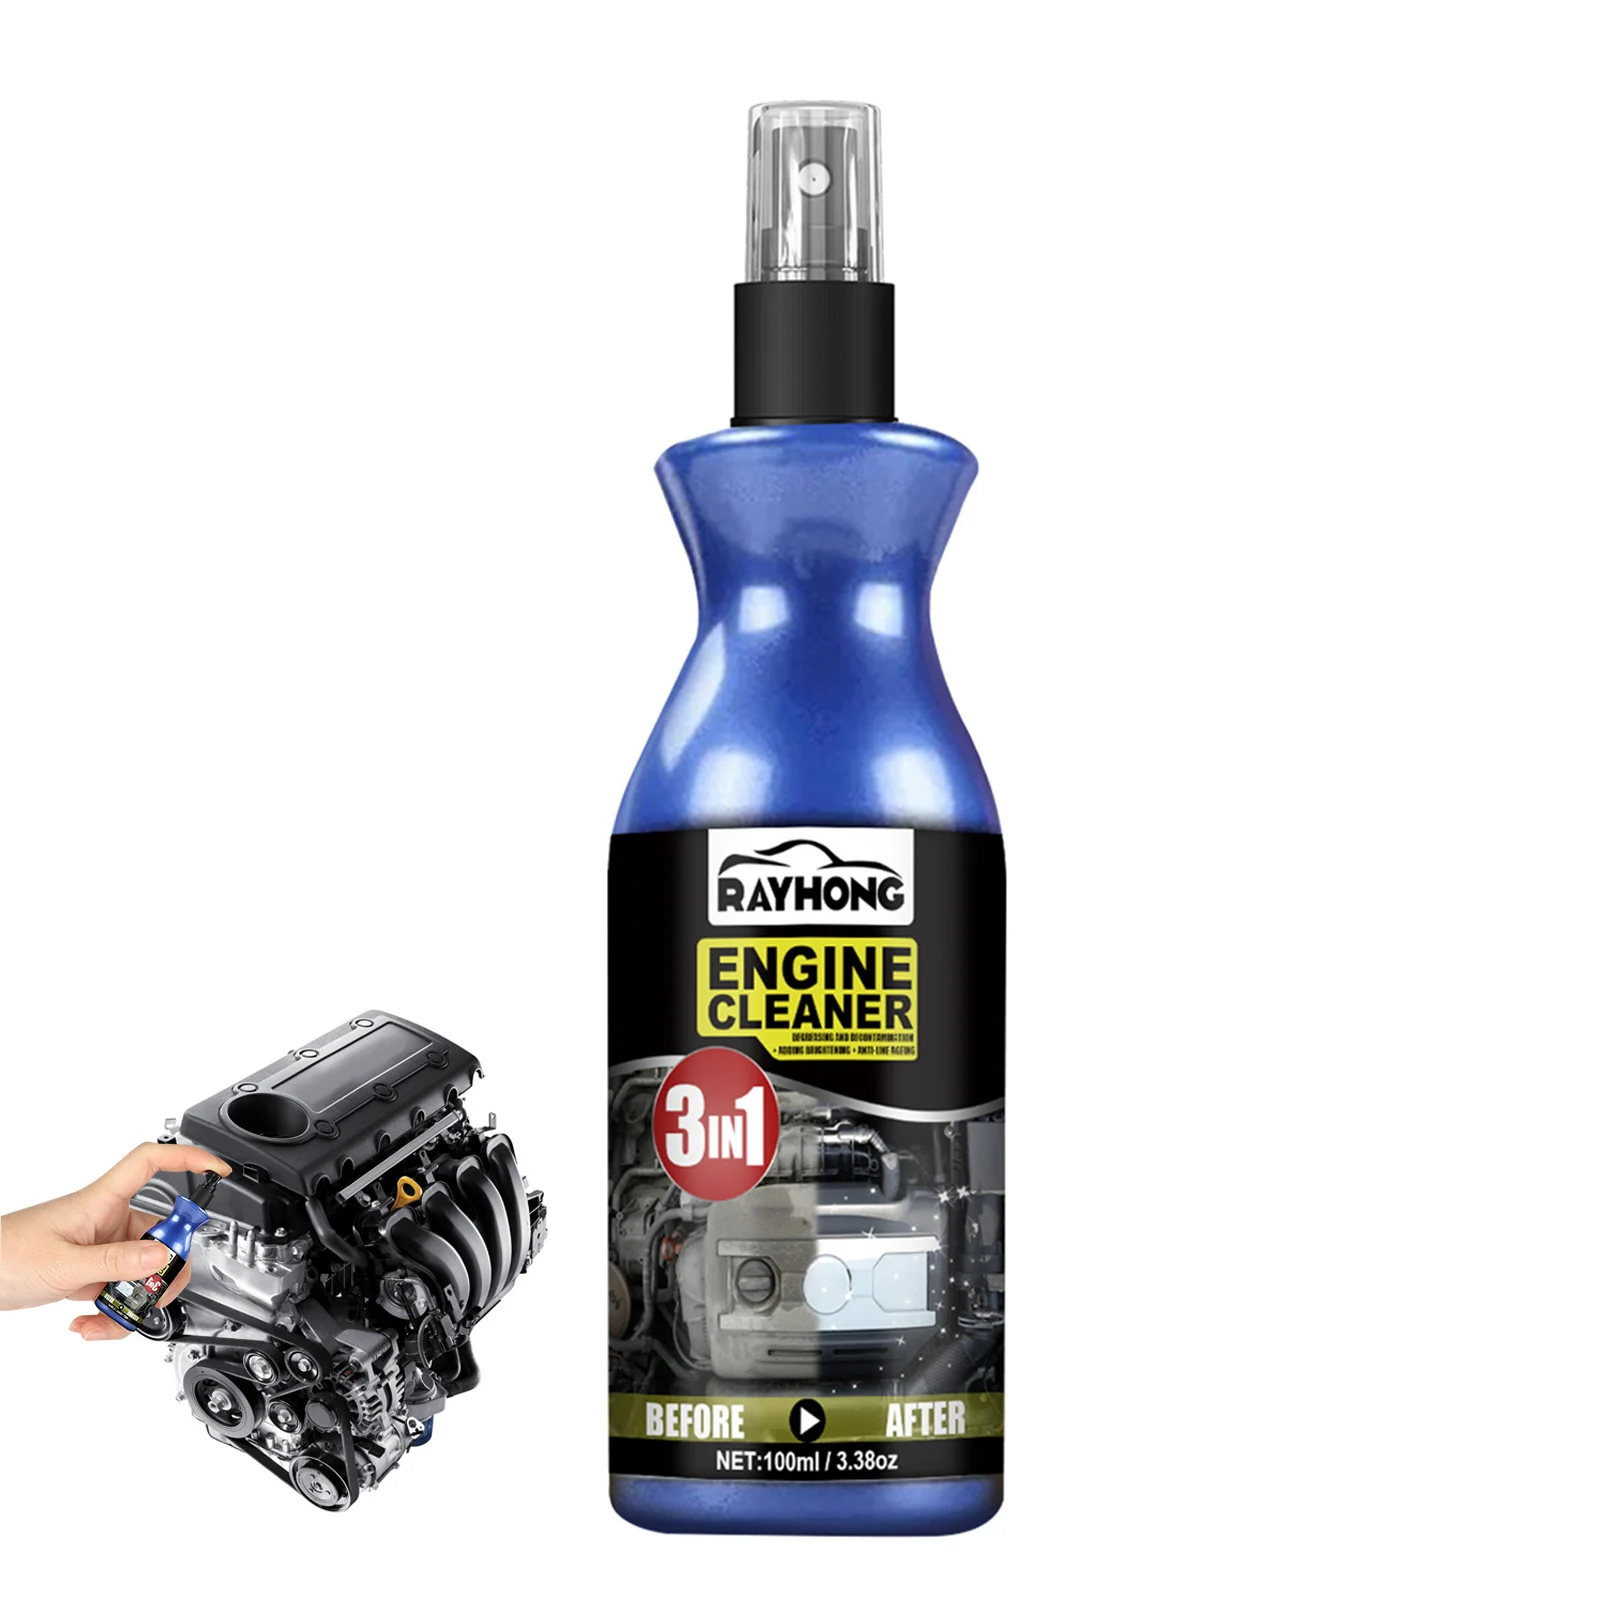 

Engine Cleaner Degreaser Oil Grease Remover Degreaser Cleaner Spray Quick And Bright Cleaner For Car Motorcycle Automotive And